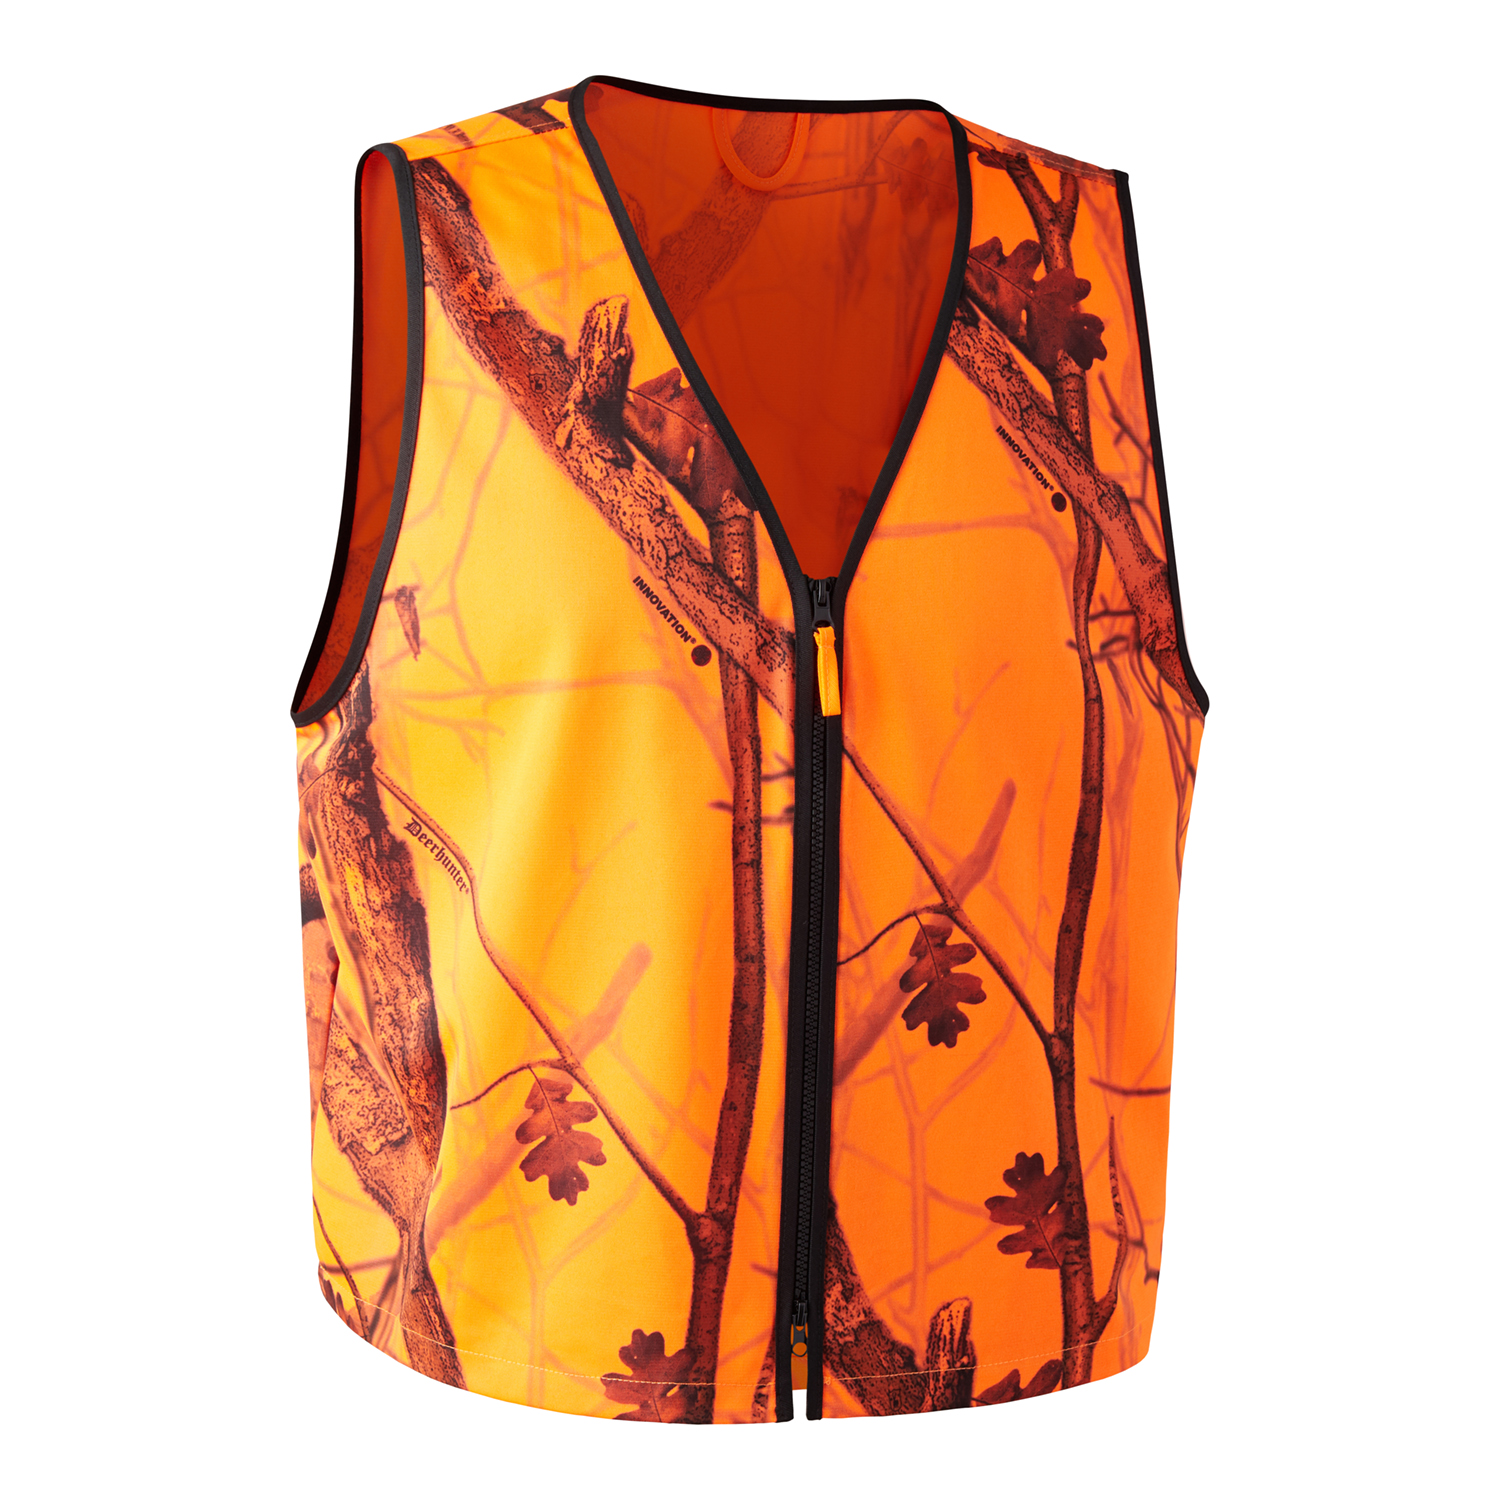 Protector Pull-over Vest - Orange GH Camo - 3XL thumbnail